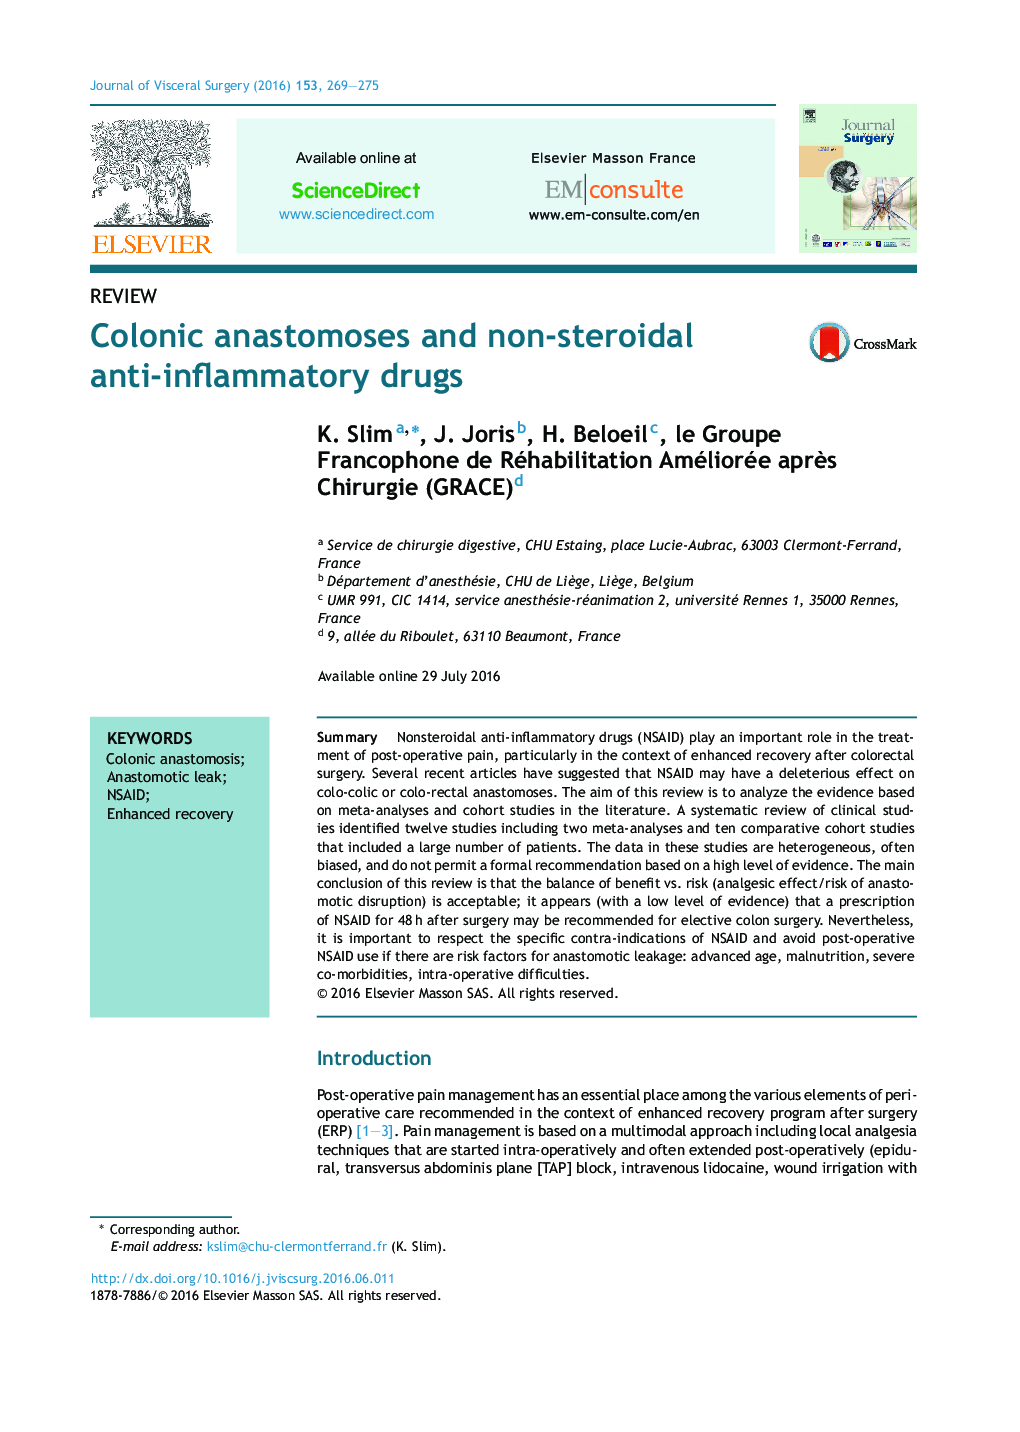 Colonic anastomoses and non-steroidal anti-inflammatory drugs